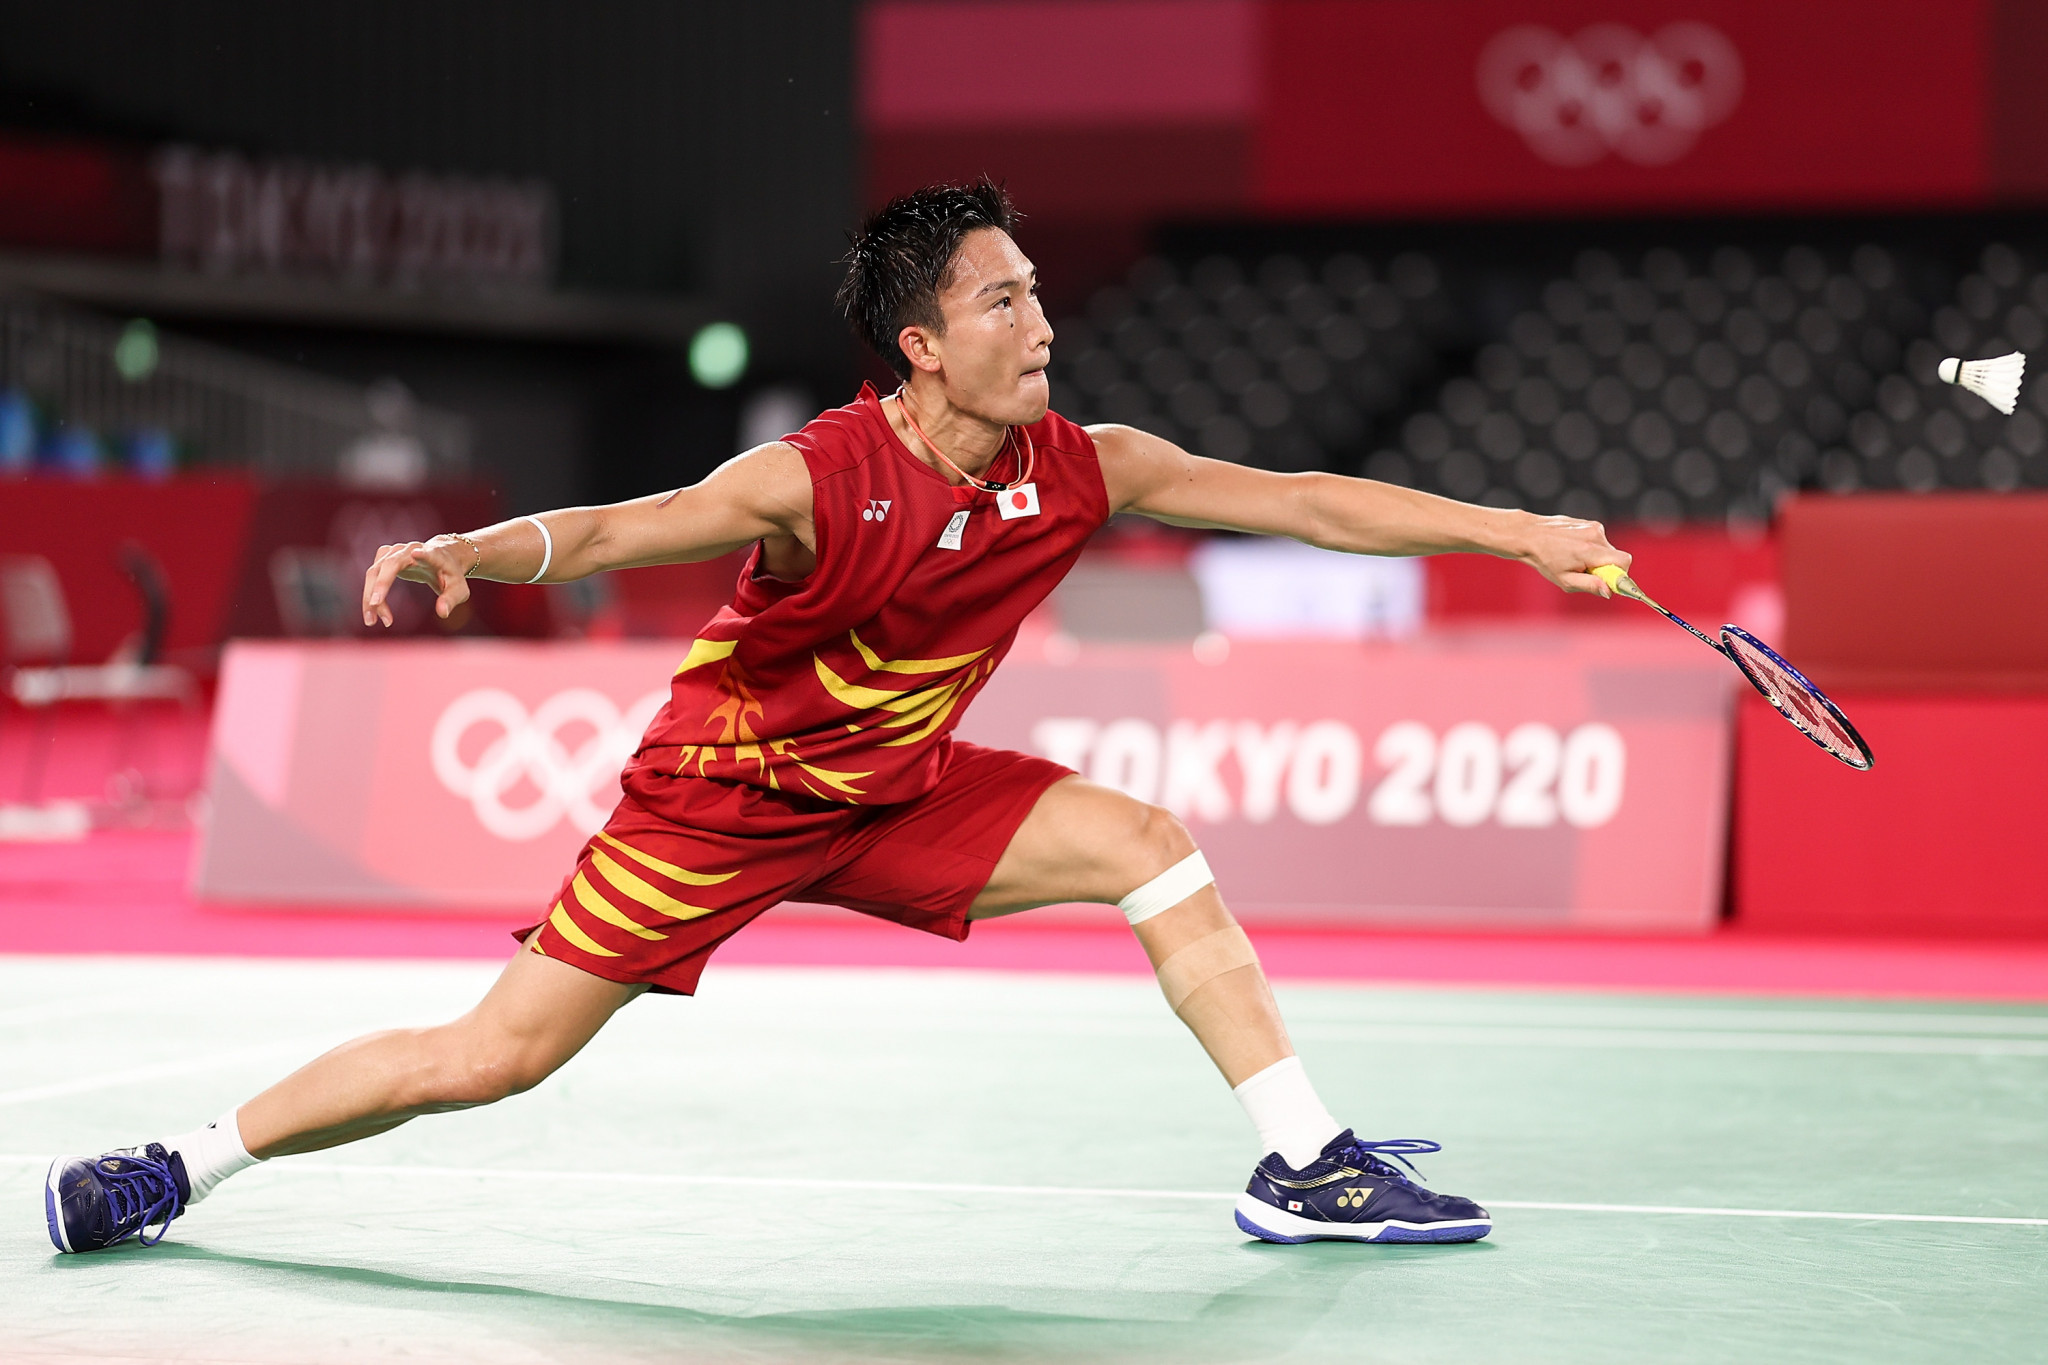 Men's singles top seed Momota suffers early exit at Badminton Asia Championships